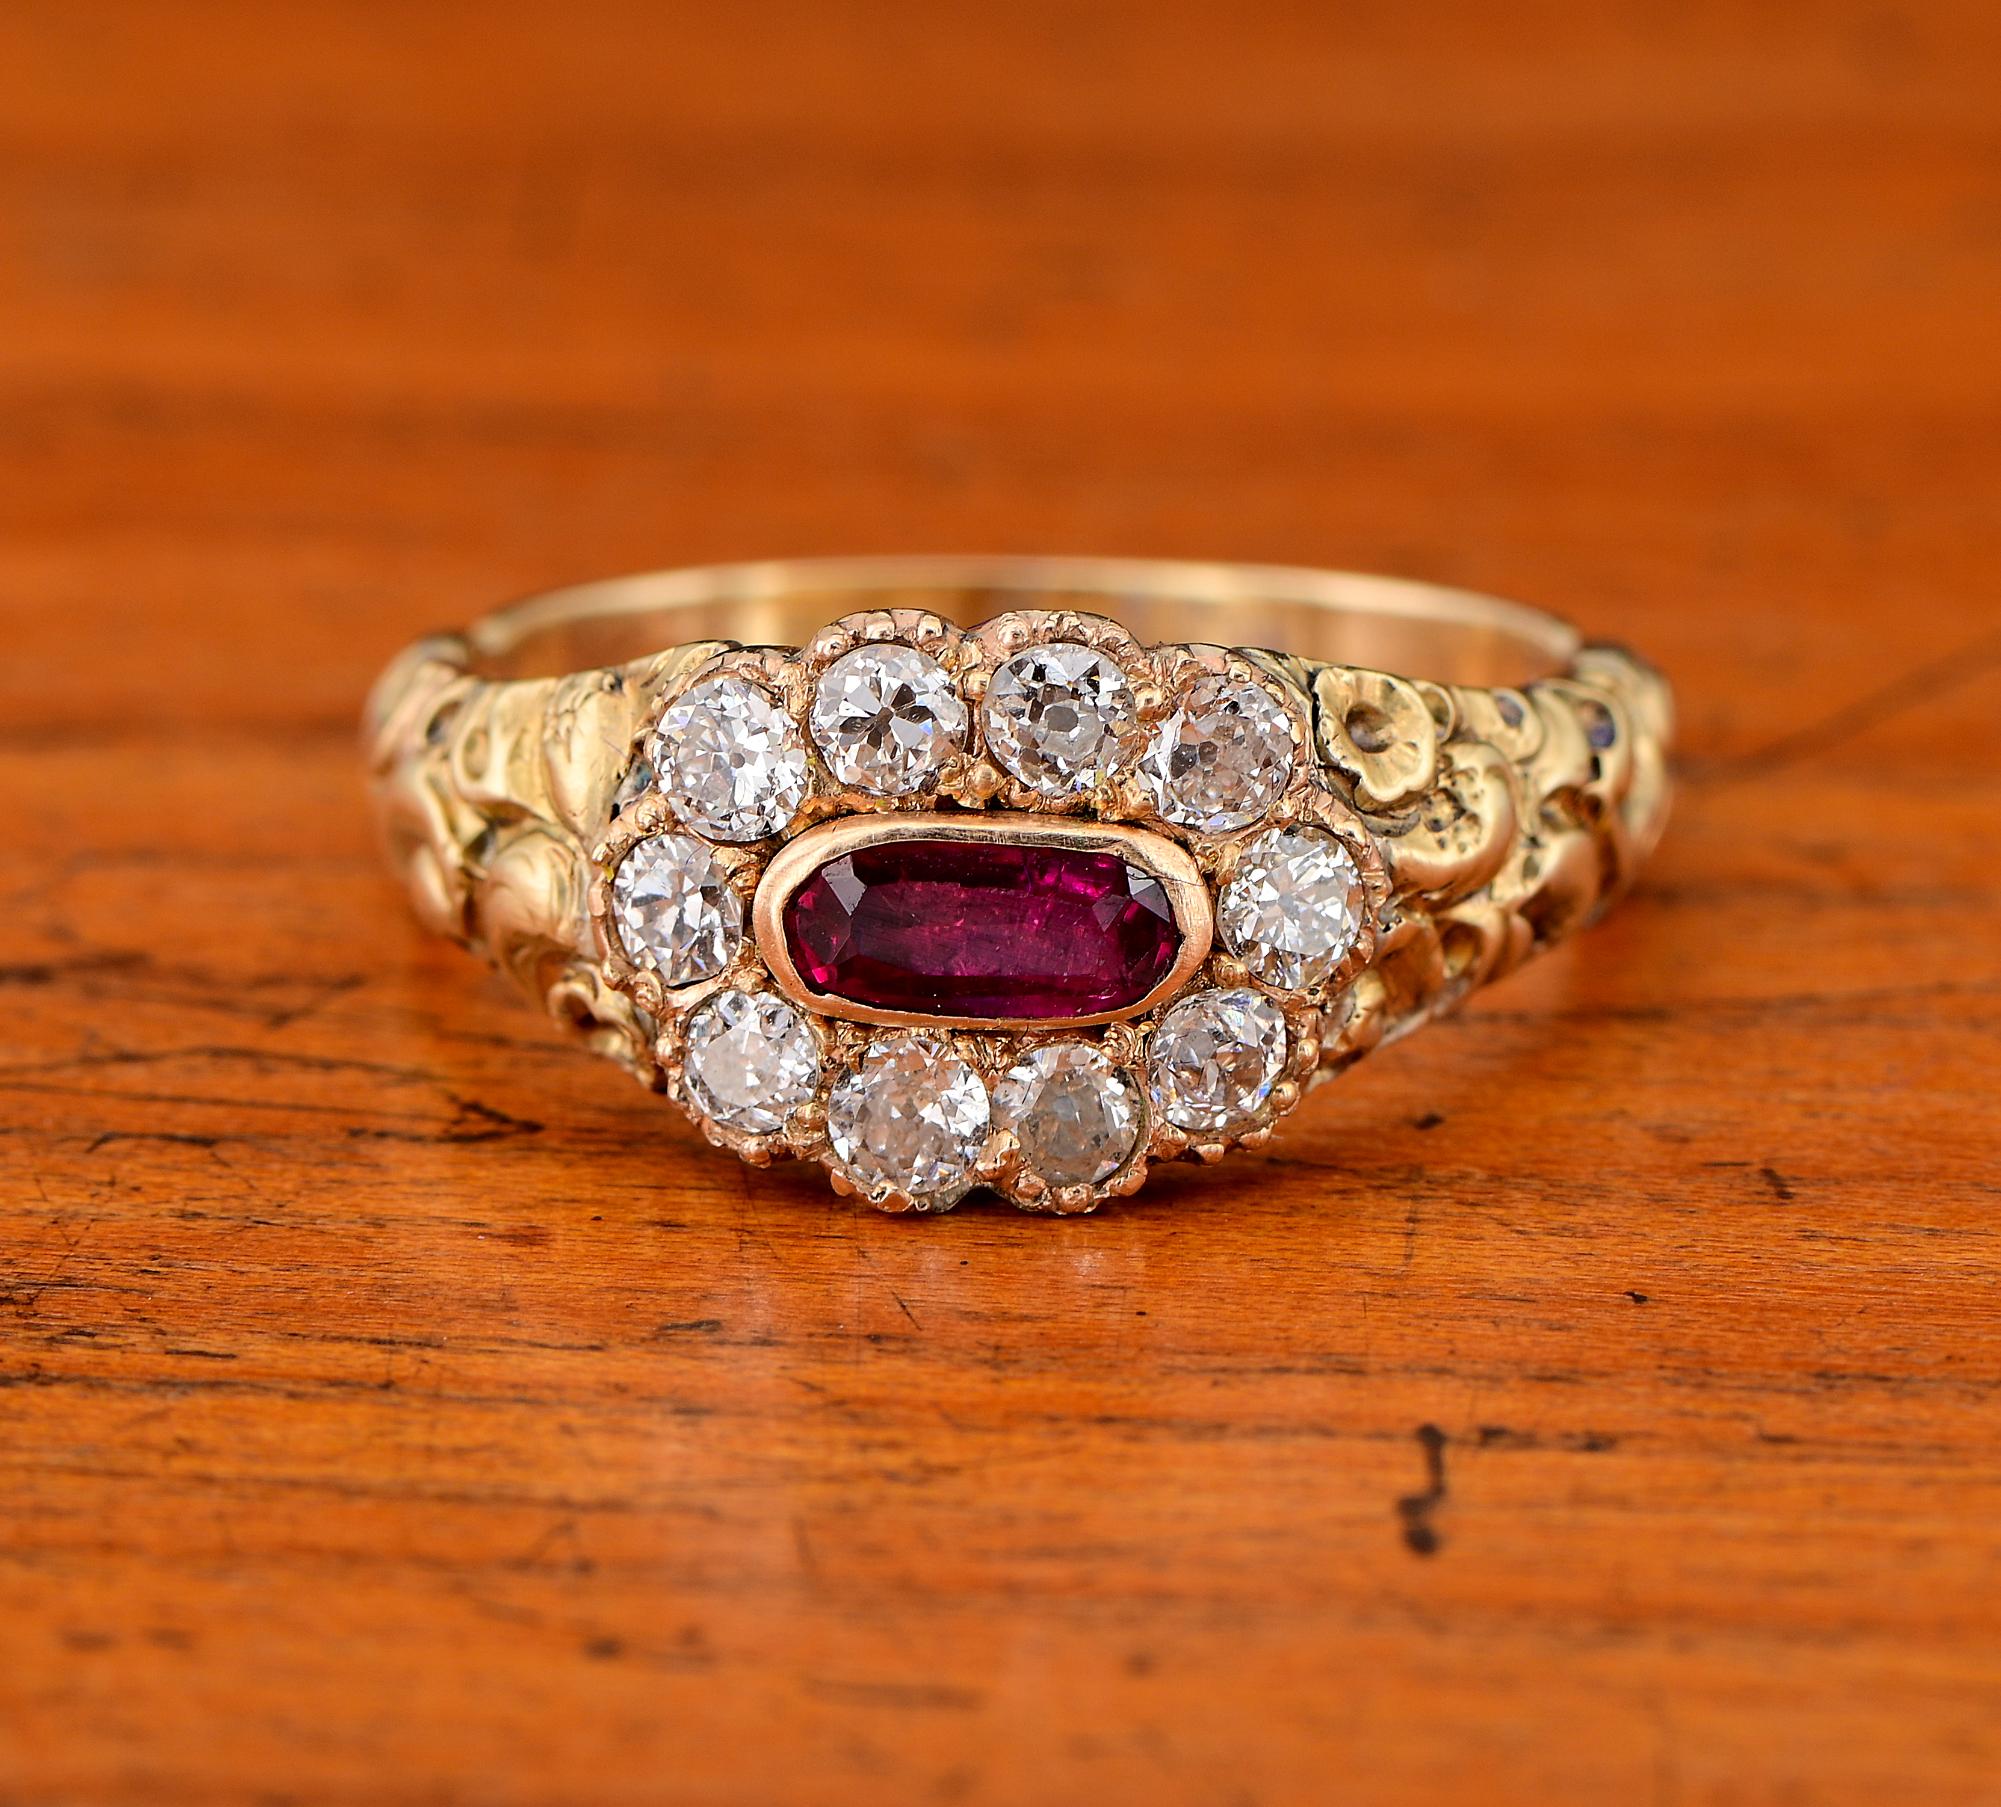 Memories Behind History
An antique 19th century Memorial Ruby and Diamond cluster ring
Exquisite work of art and unique example of the memento mori jewellery, 18 KT solid gold
Designed with an horizontal cluster of Ruby and Diamond centering the